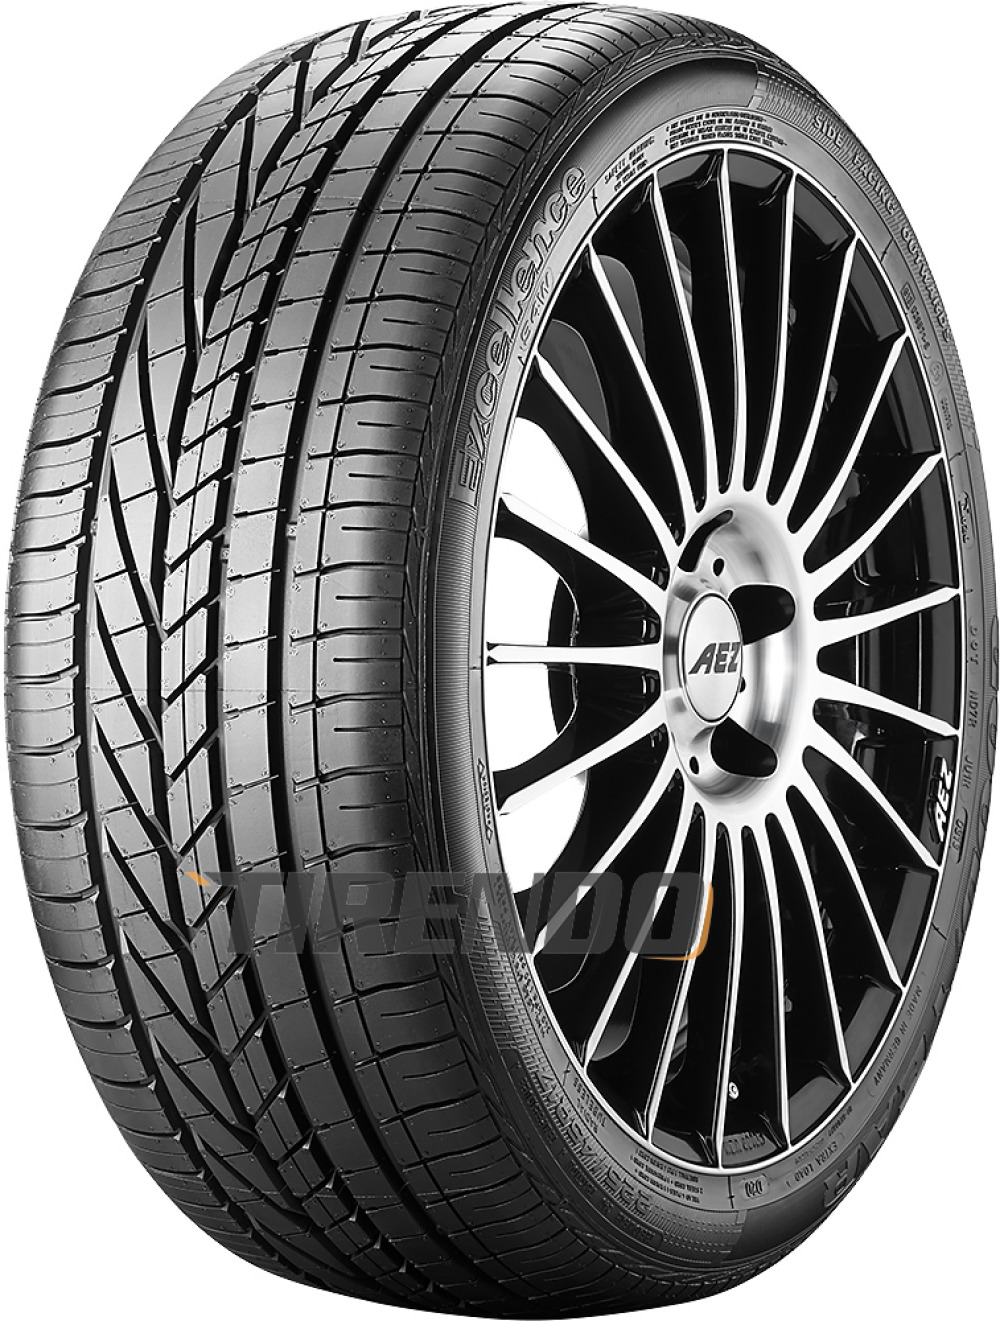 Image of Goodyear Excellence ( 195/65 R15 91H )